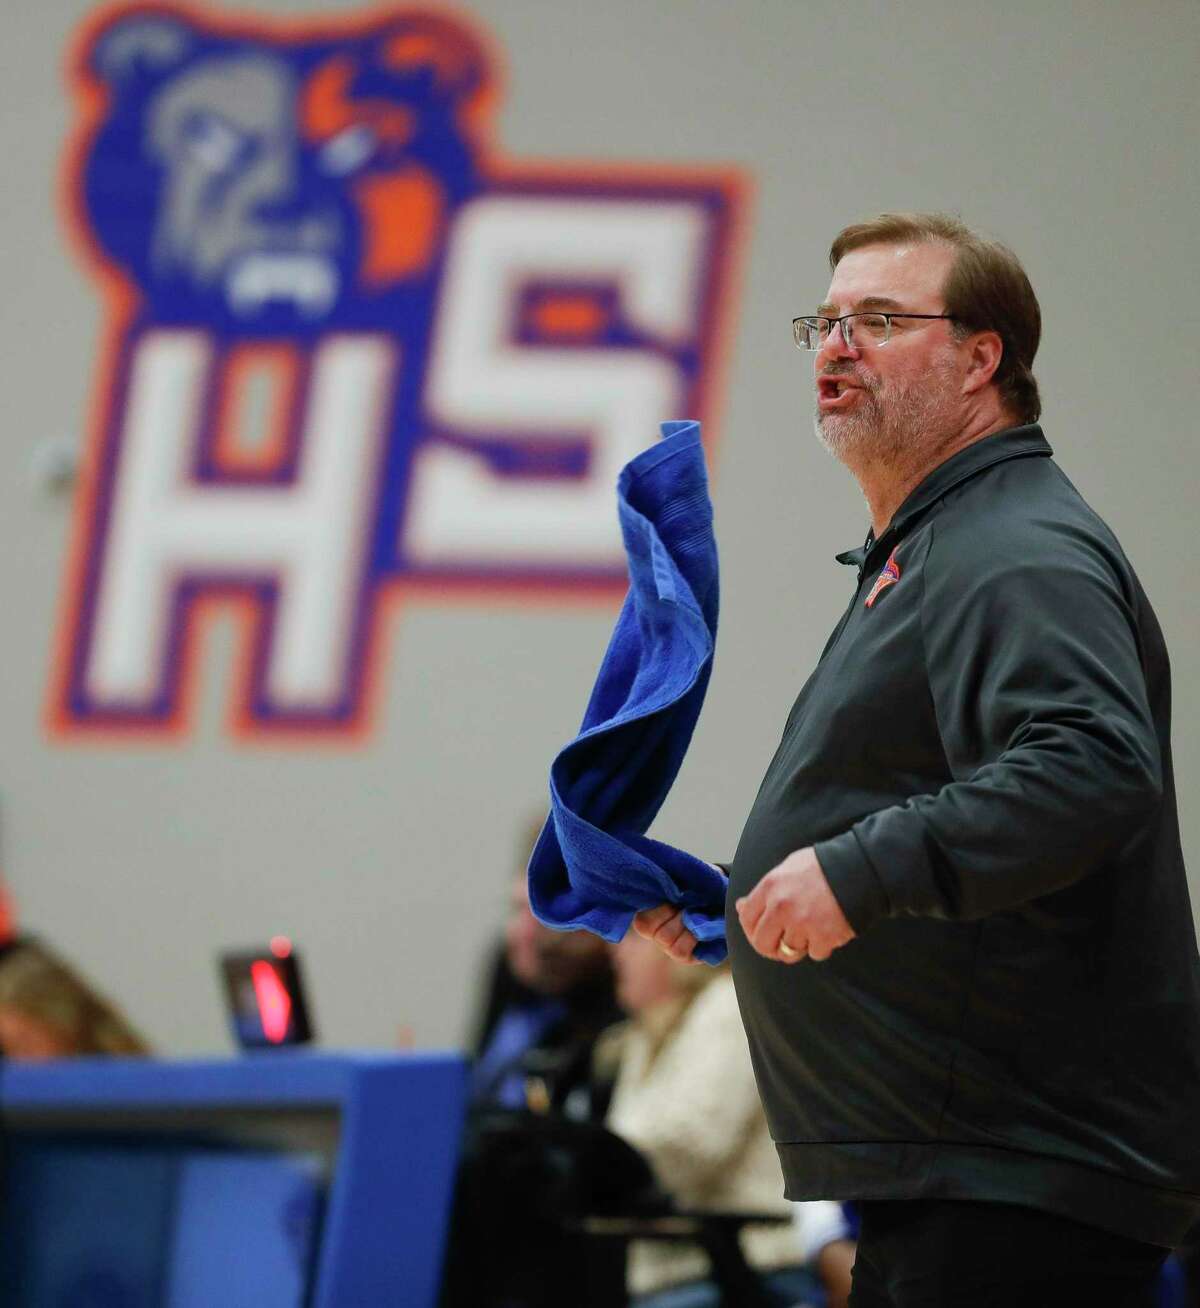 Grand Oaks head coach Mike Day waves a towel during the second quarter of a District 20-5A high school basketball game at Grand Oaks High School, Tuesday, Jan. 21, 2020, in Spring.